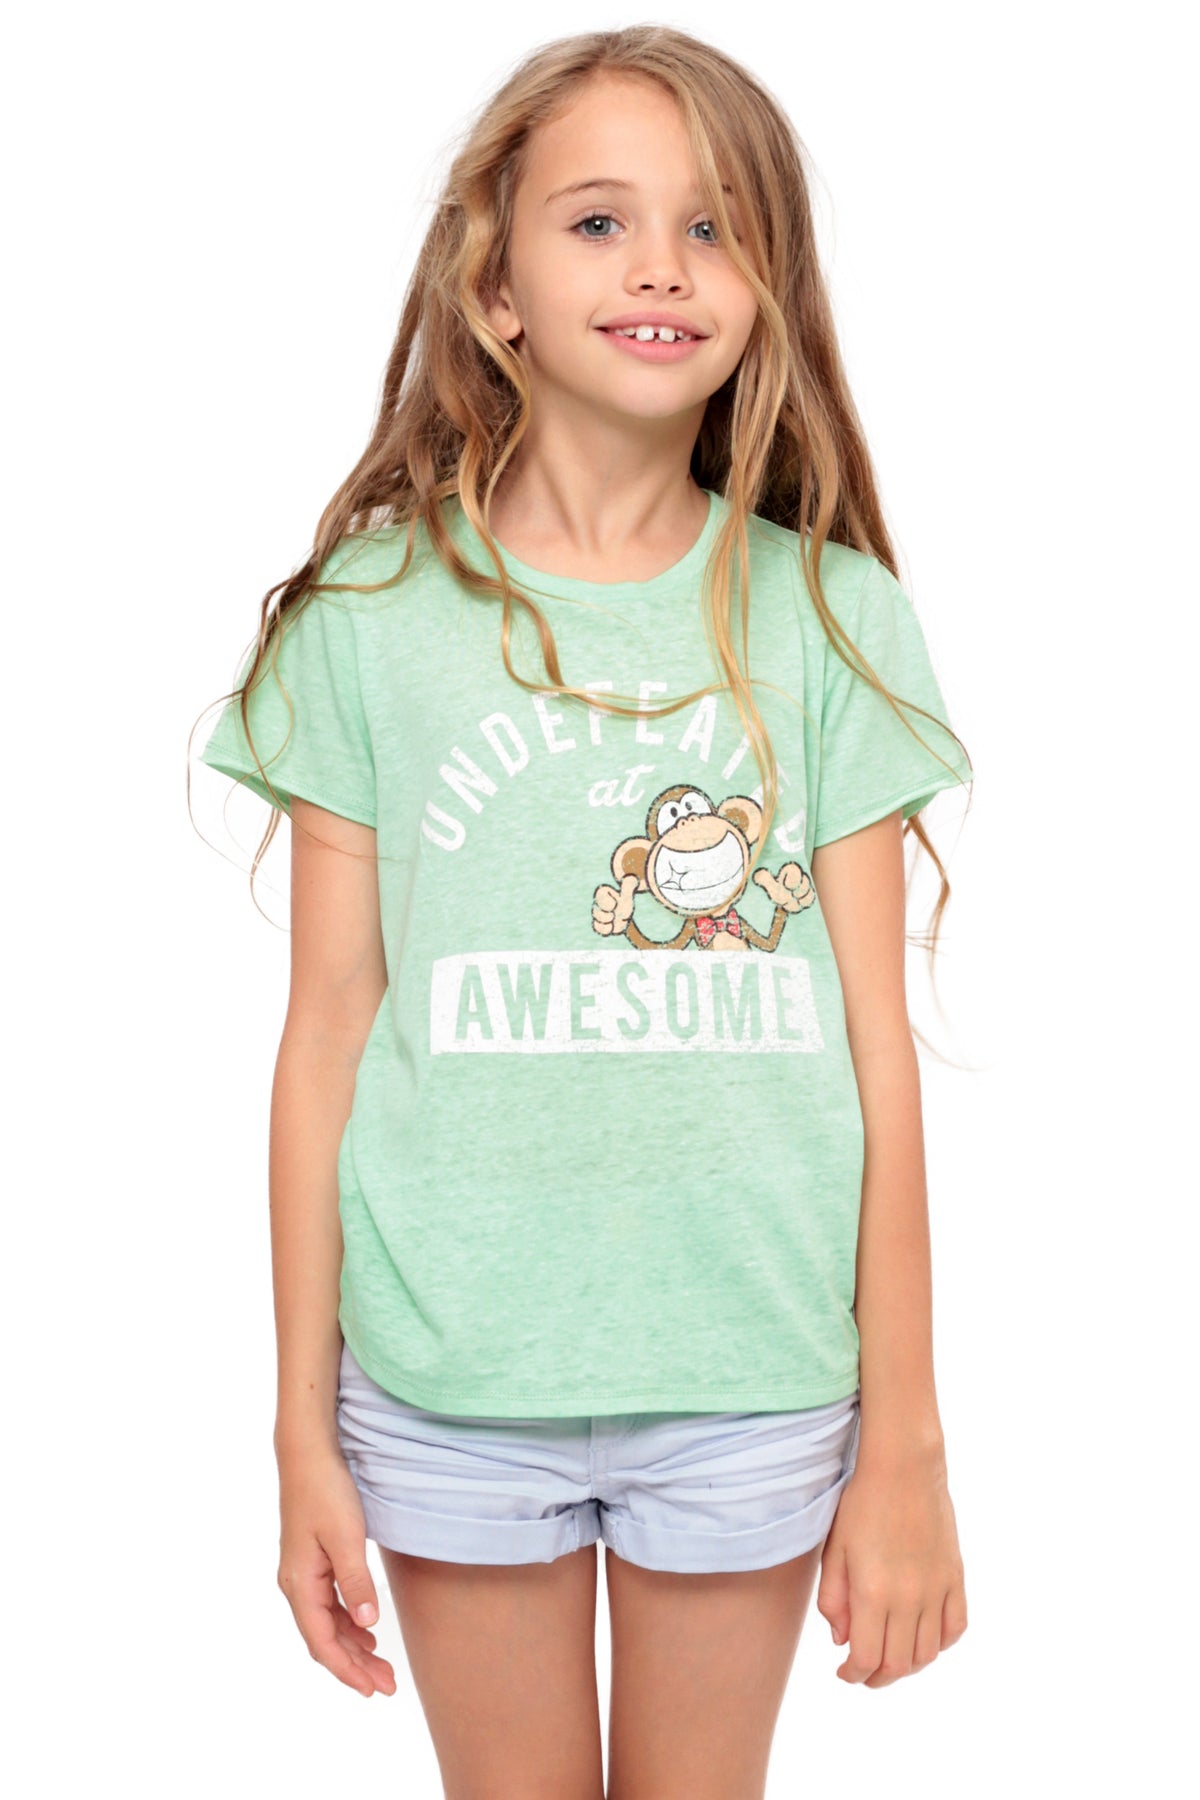 Undefeated At Awesome | Crop Top - Mint